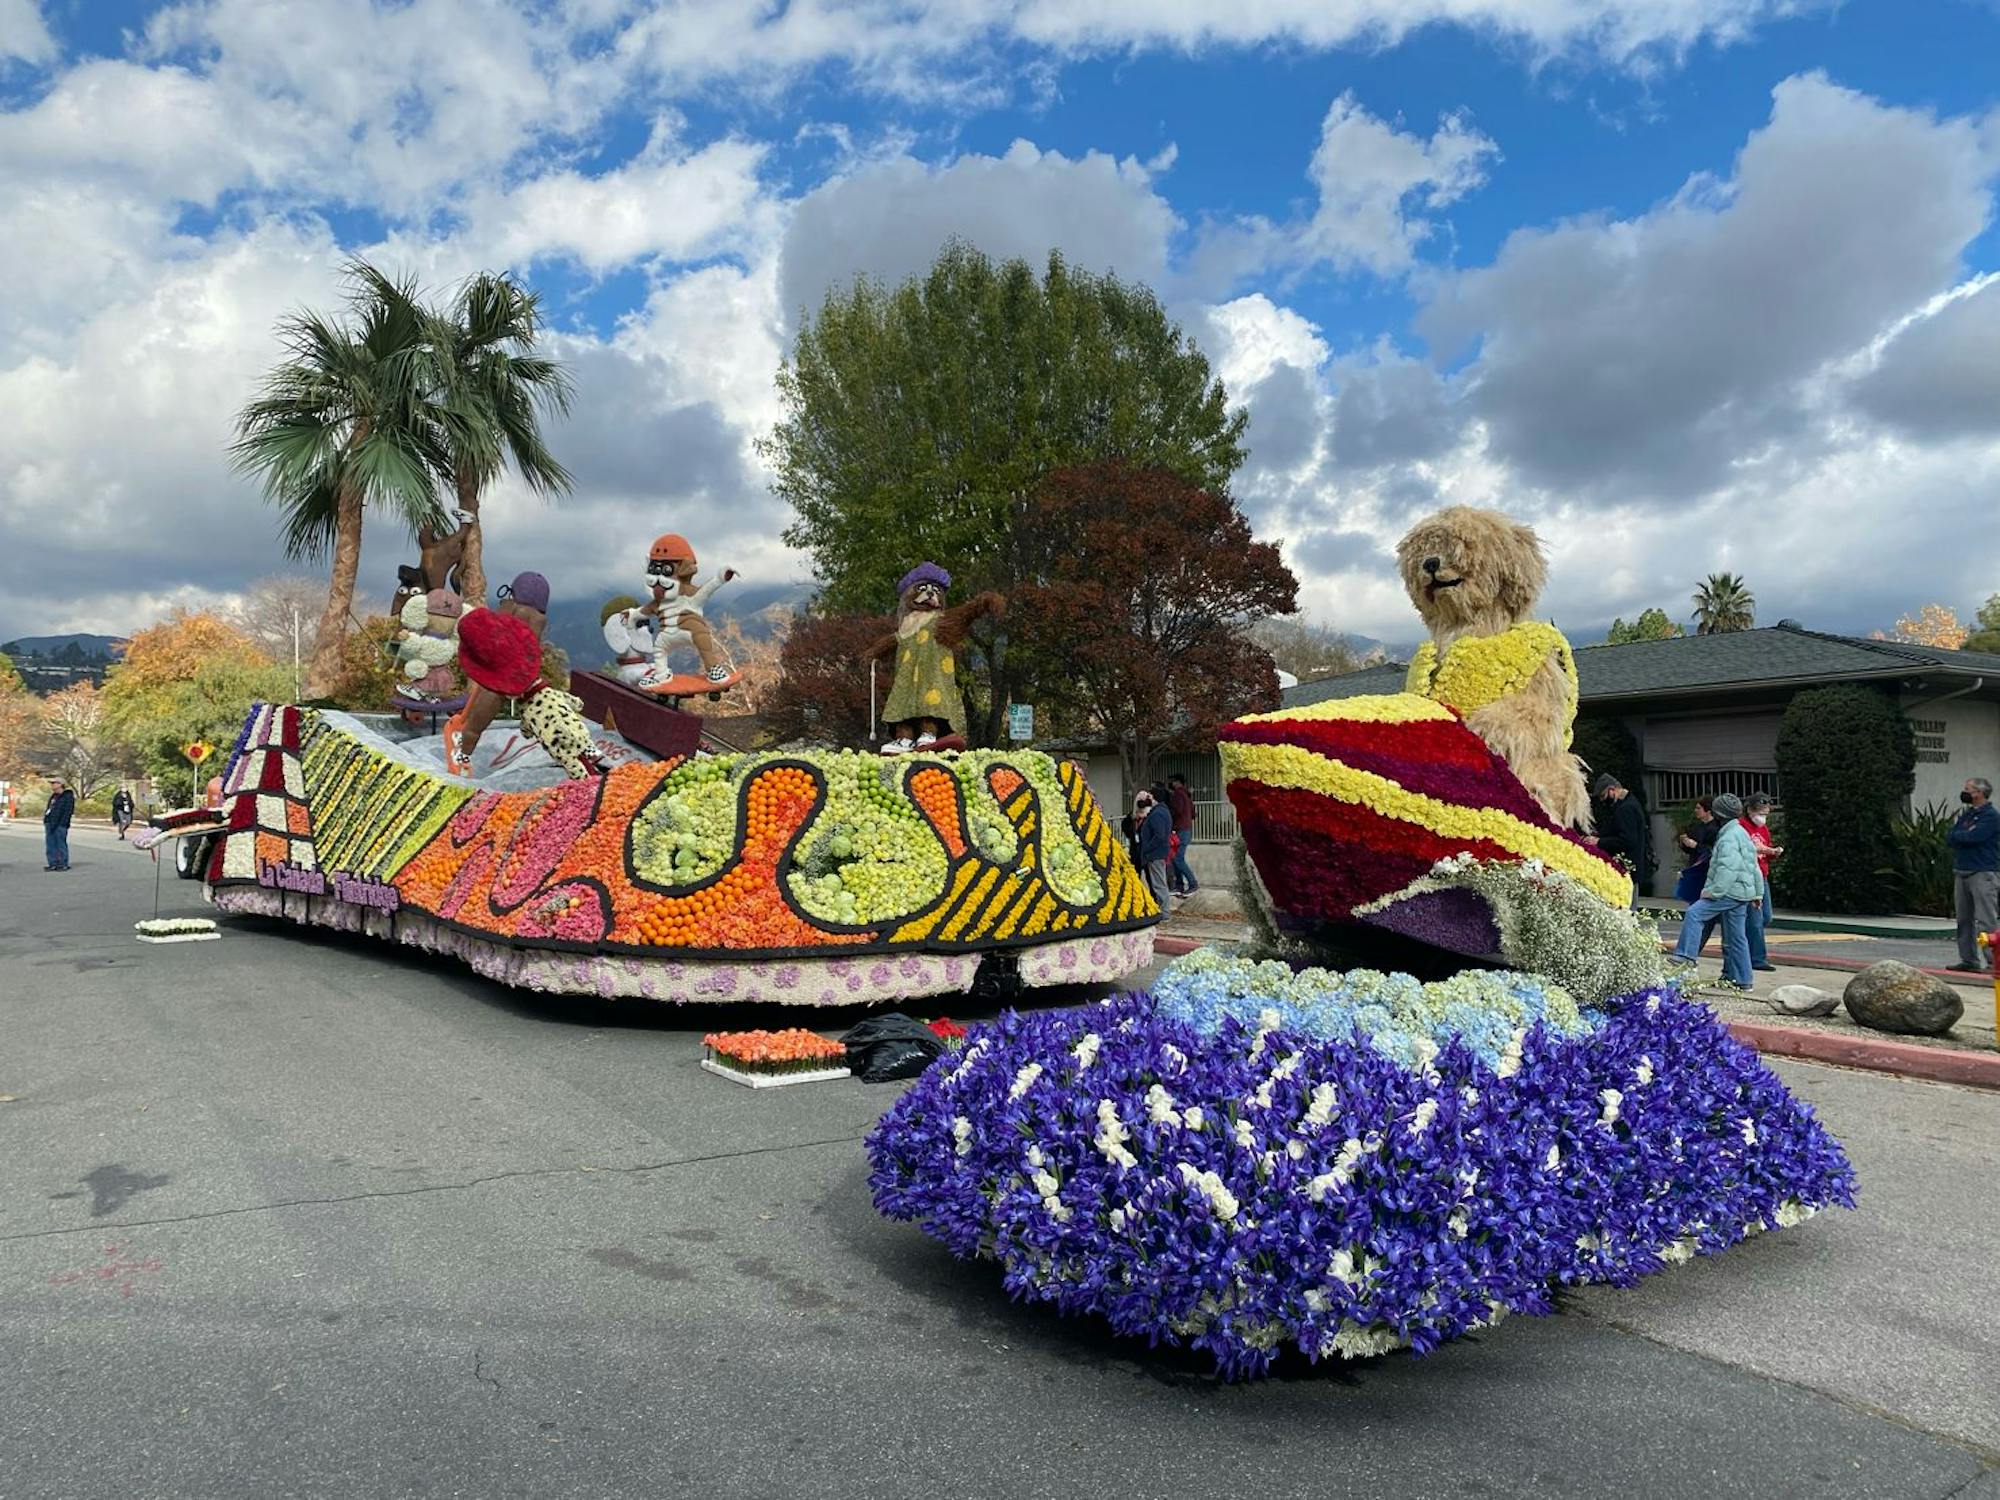 Parade float with orange, green, purple flowers